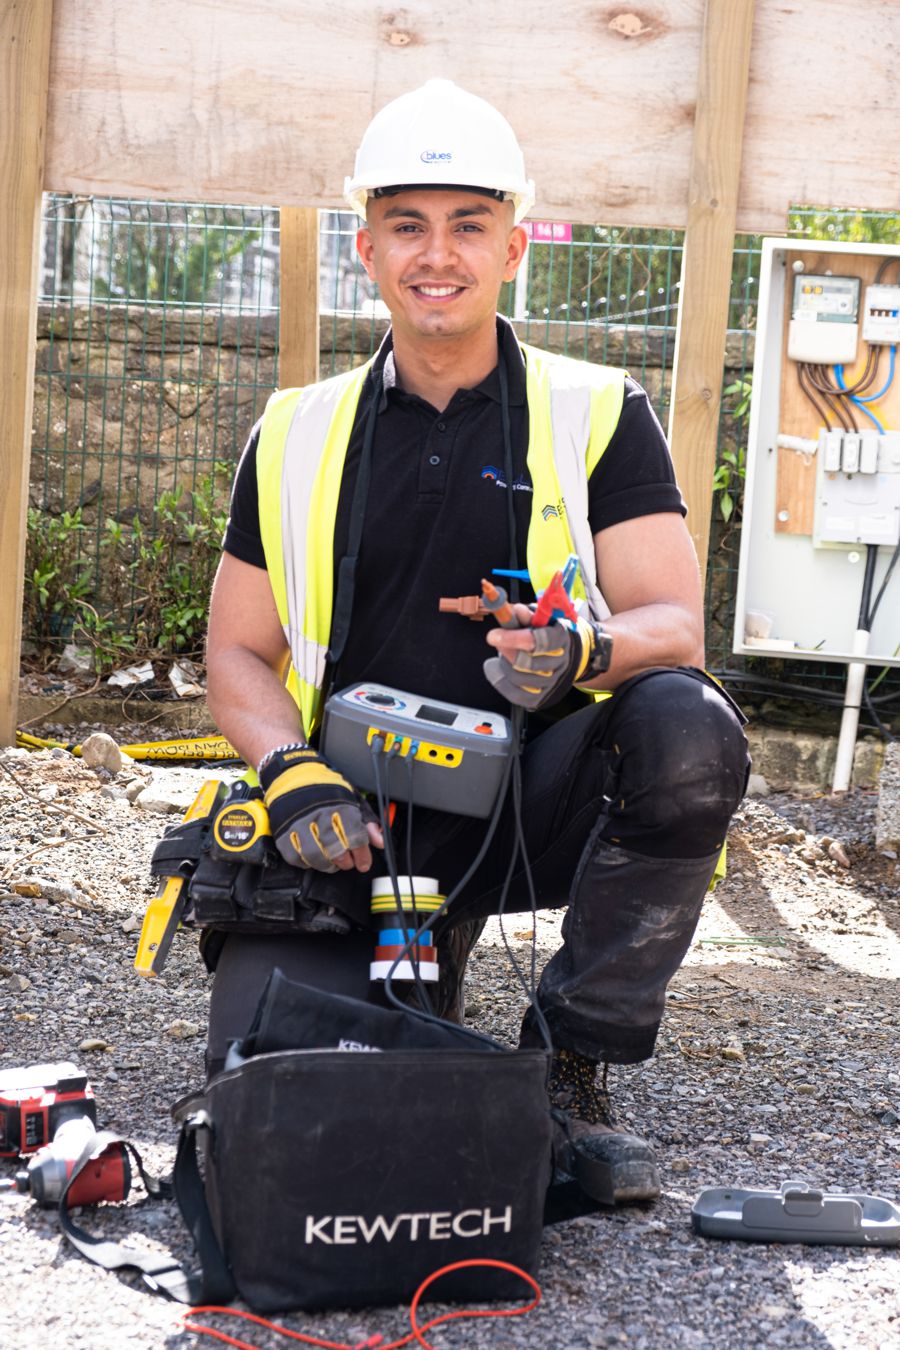 Screwfix Apprentice of the Year candidate Kaiden Ashun Picture by Nick Treharne